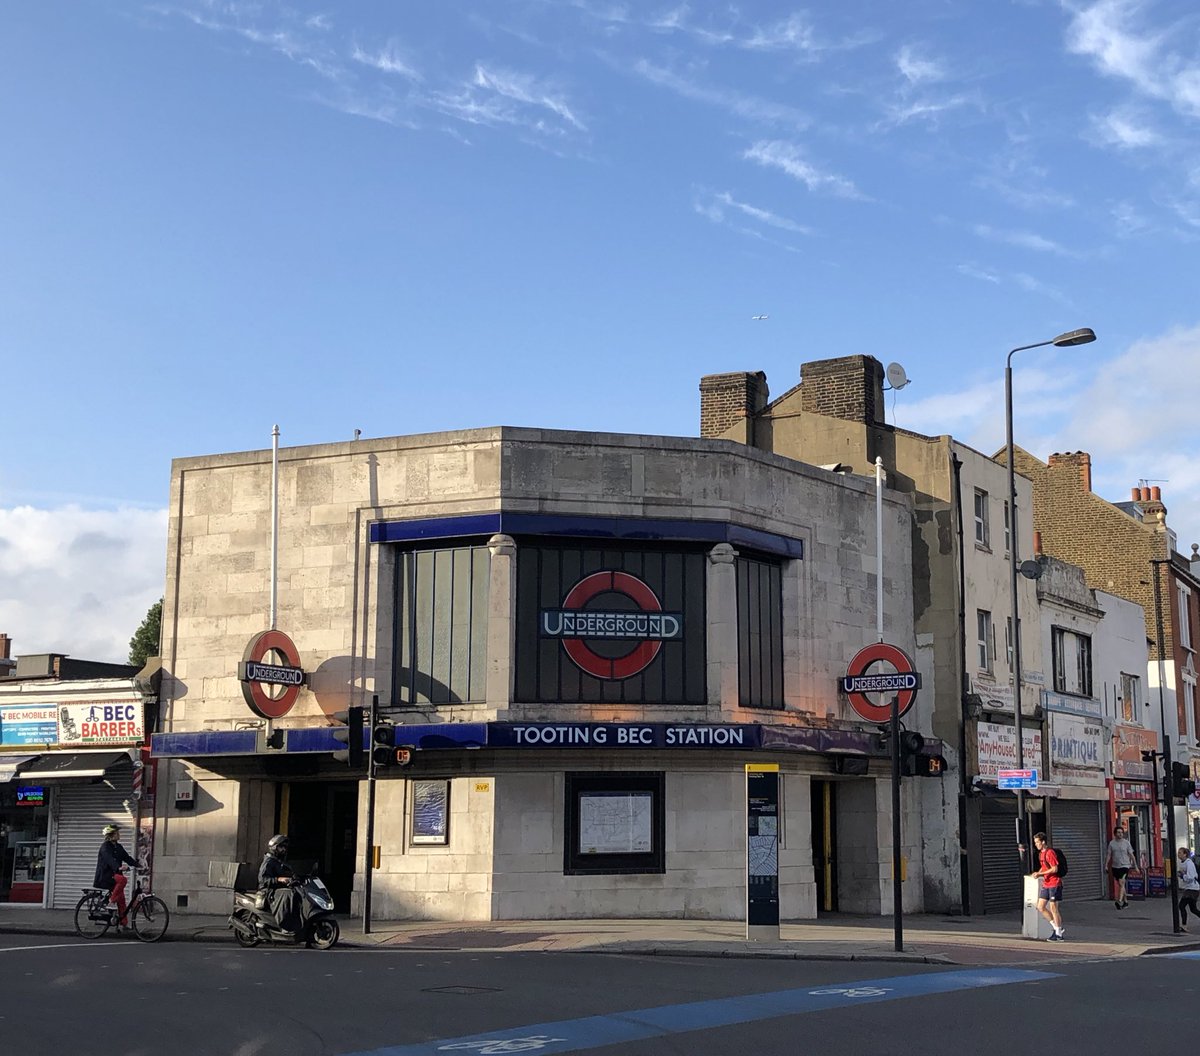 Here’s Tooting Bec tube station - note the London Transport roundel detailing on the columns – bei  Tooting Bec London Underground Station